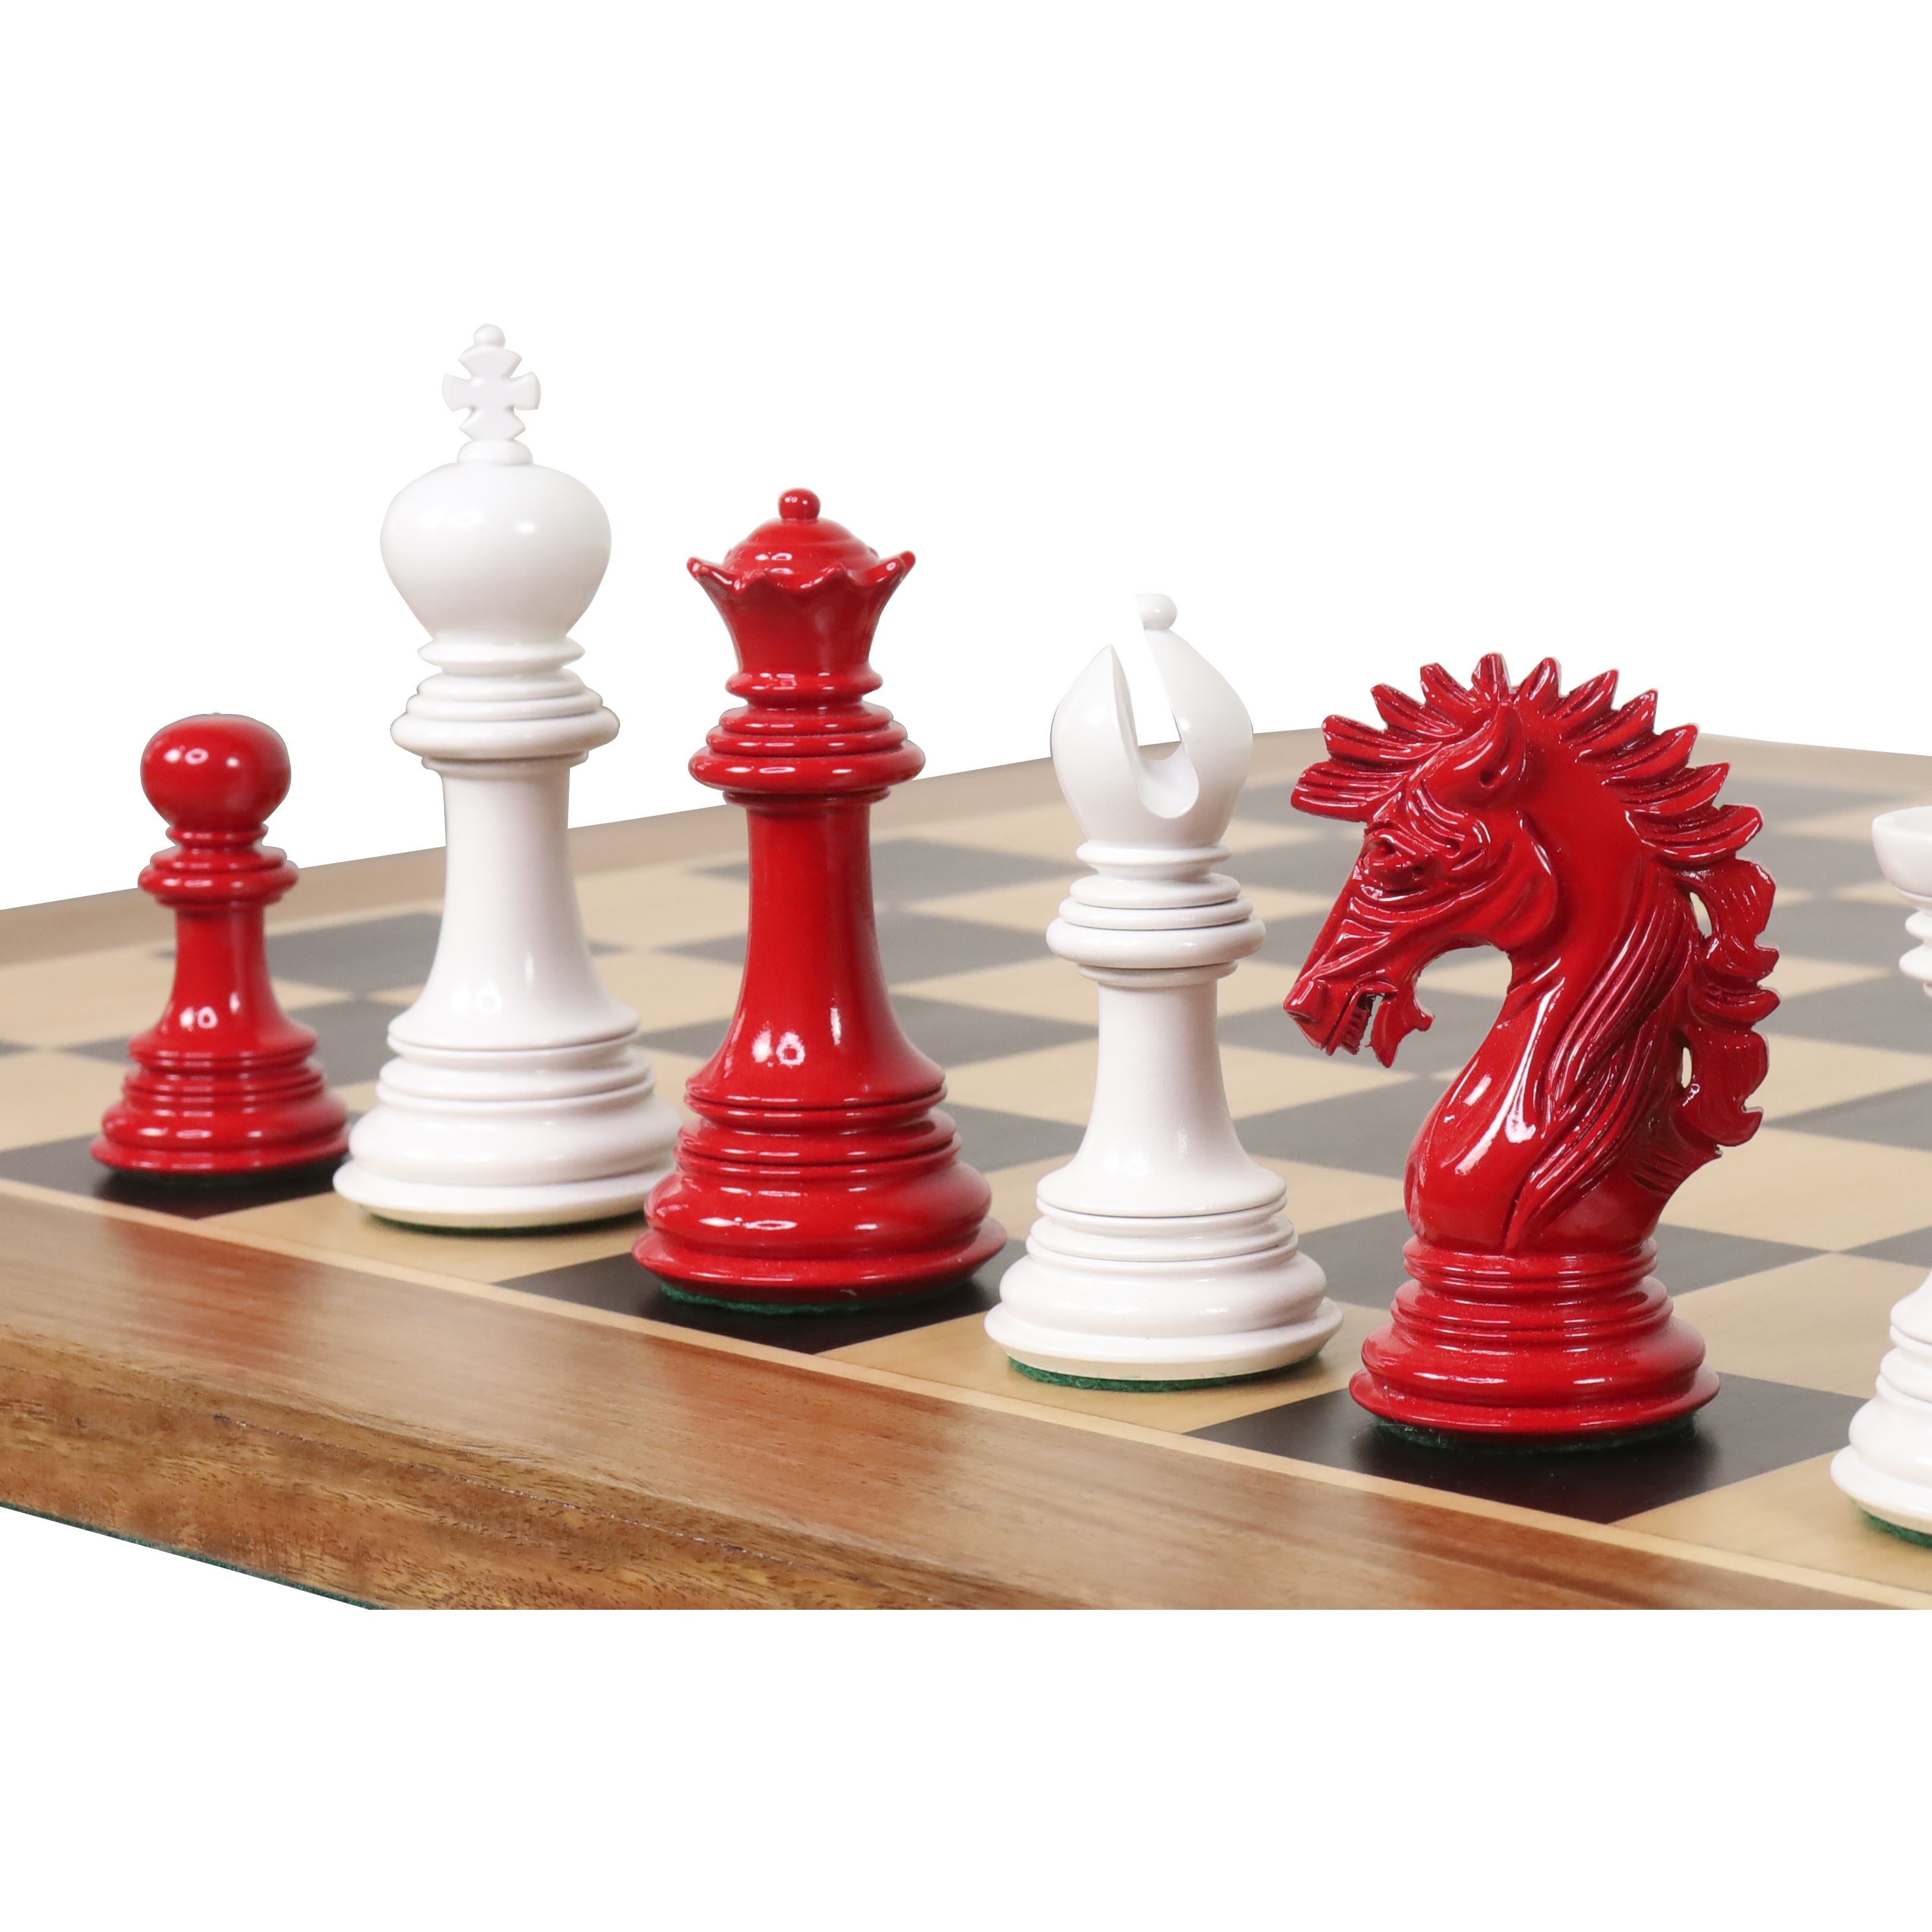 Slightly imperfect 4.6" Mogul Staunton Luxury Chess Pieces Only Set - White & Red Lacquered Boxwood